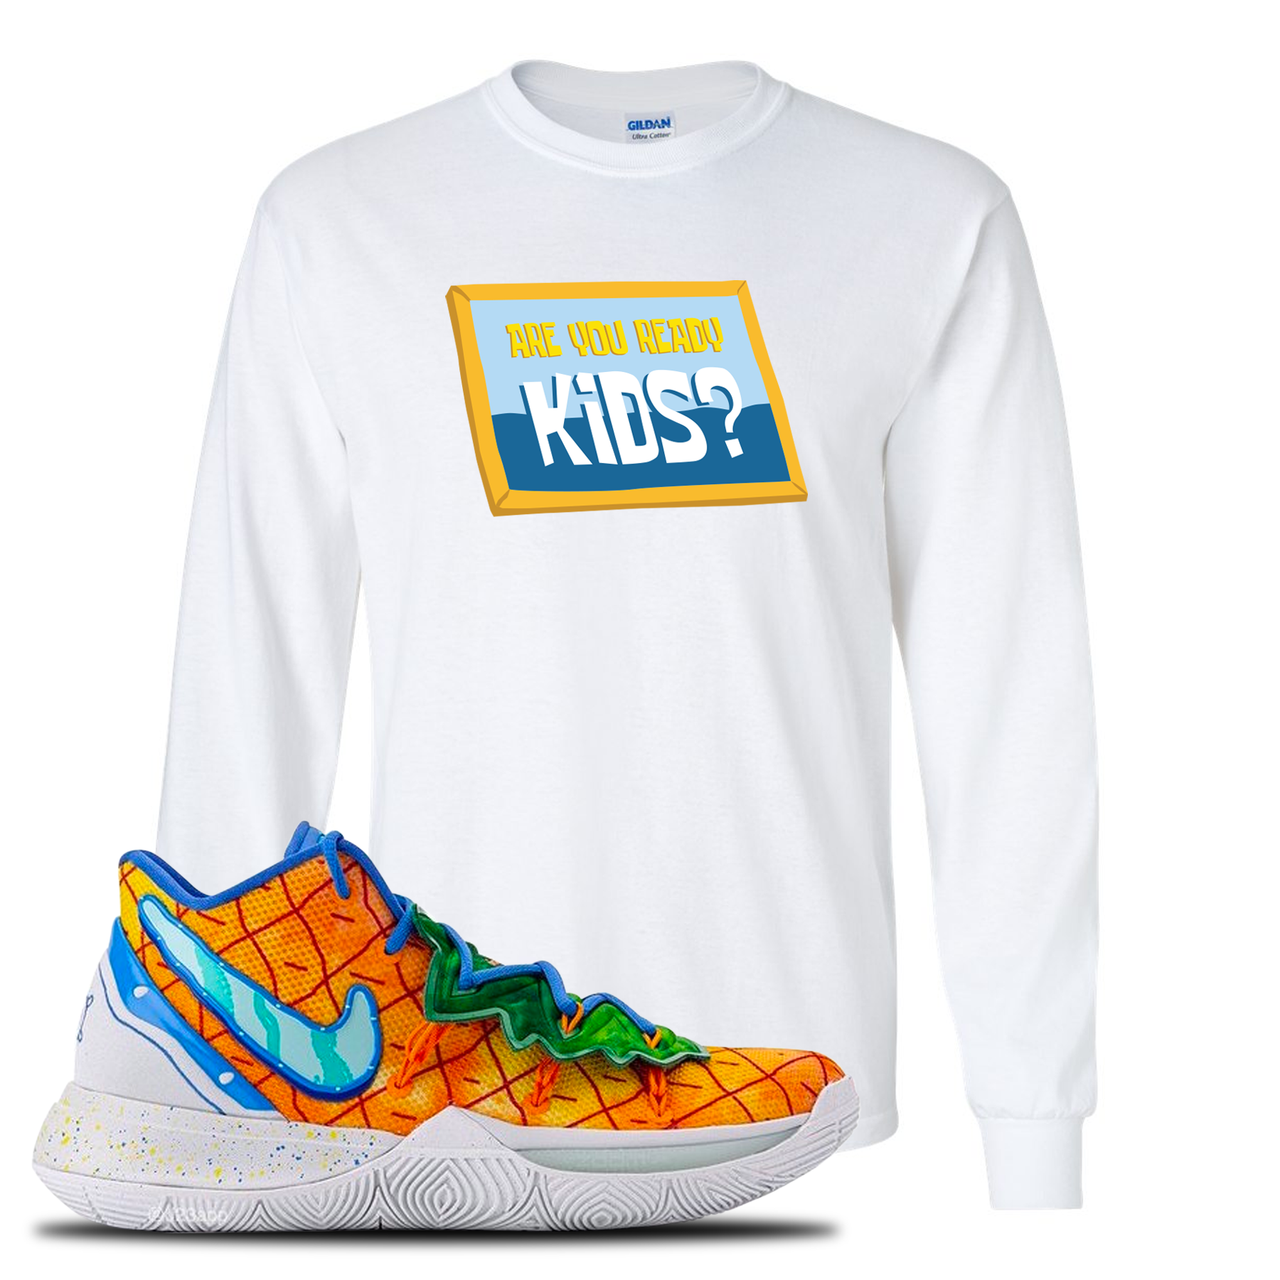 Kyrie 5 Pineapple House Are You Ready Kids? White Sneaker Hook Up Longsleeve T-Shirt